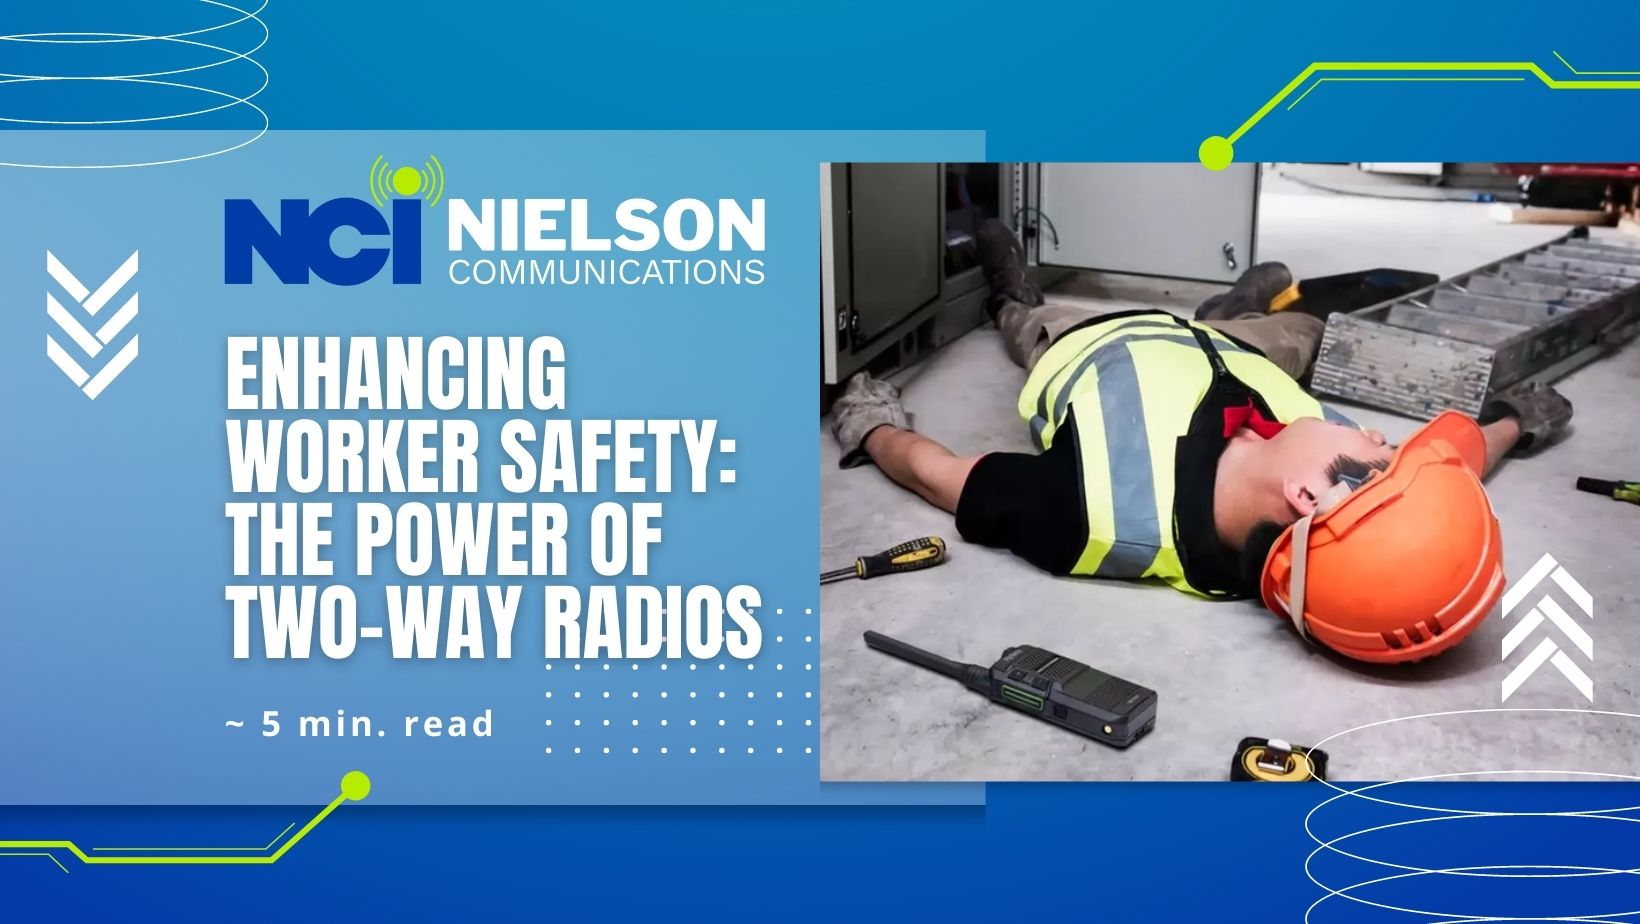 Fallen worker with tools, a ladder, and a two-way radio laying on the floor